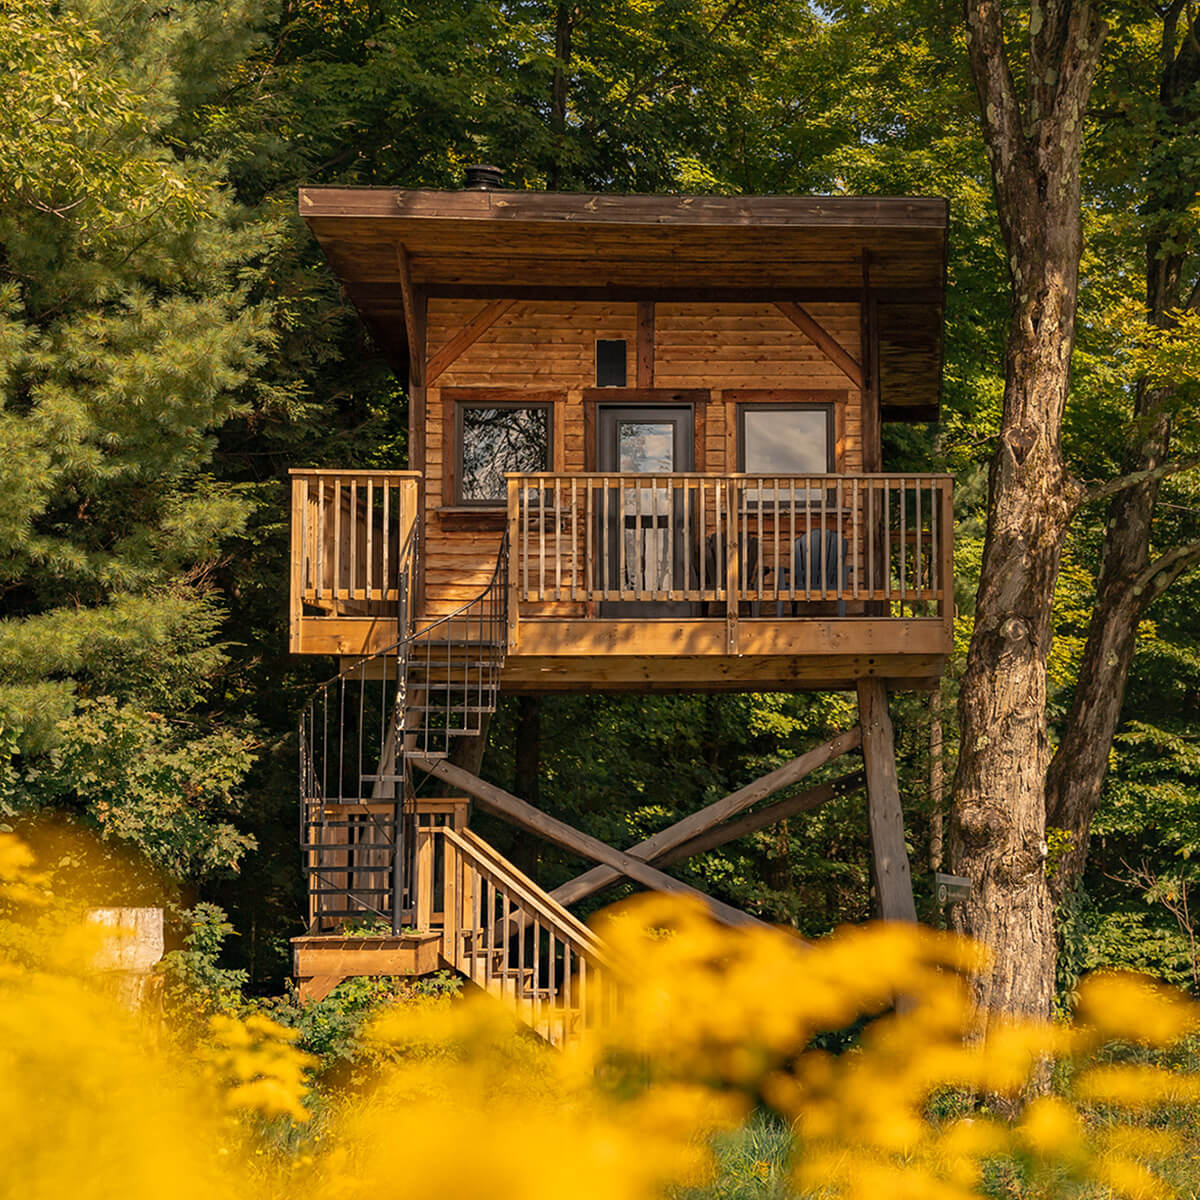 Discover the 7 types of ecological accommodation offered at Au Diable Vert - 4-season mountain and outdoor resort at Glen Sutton